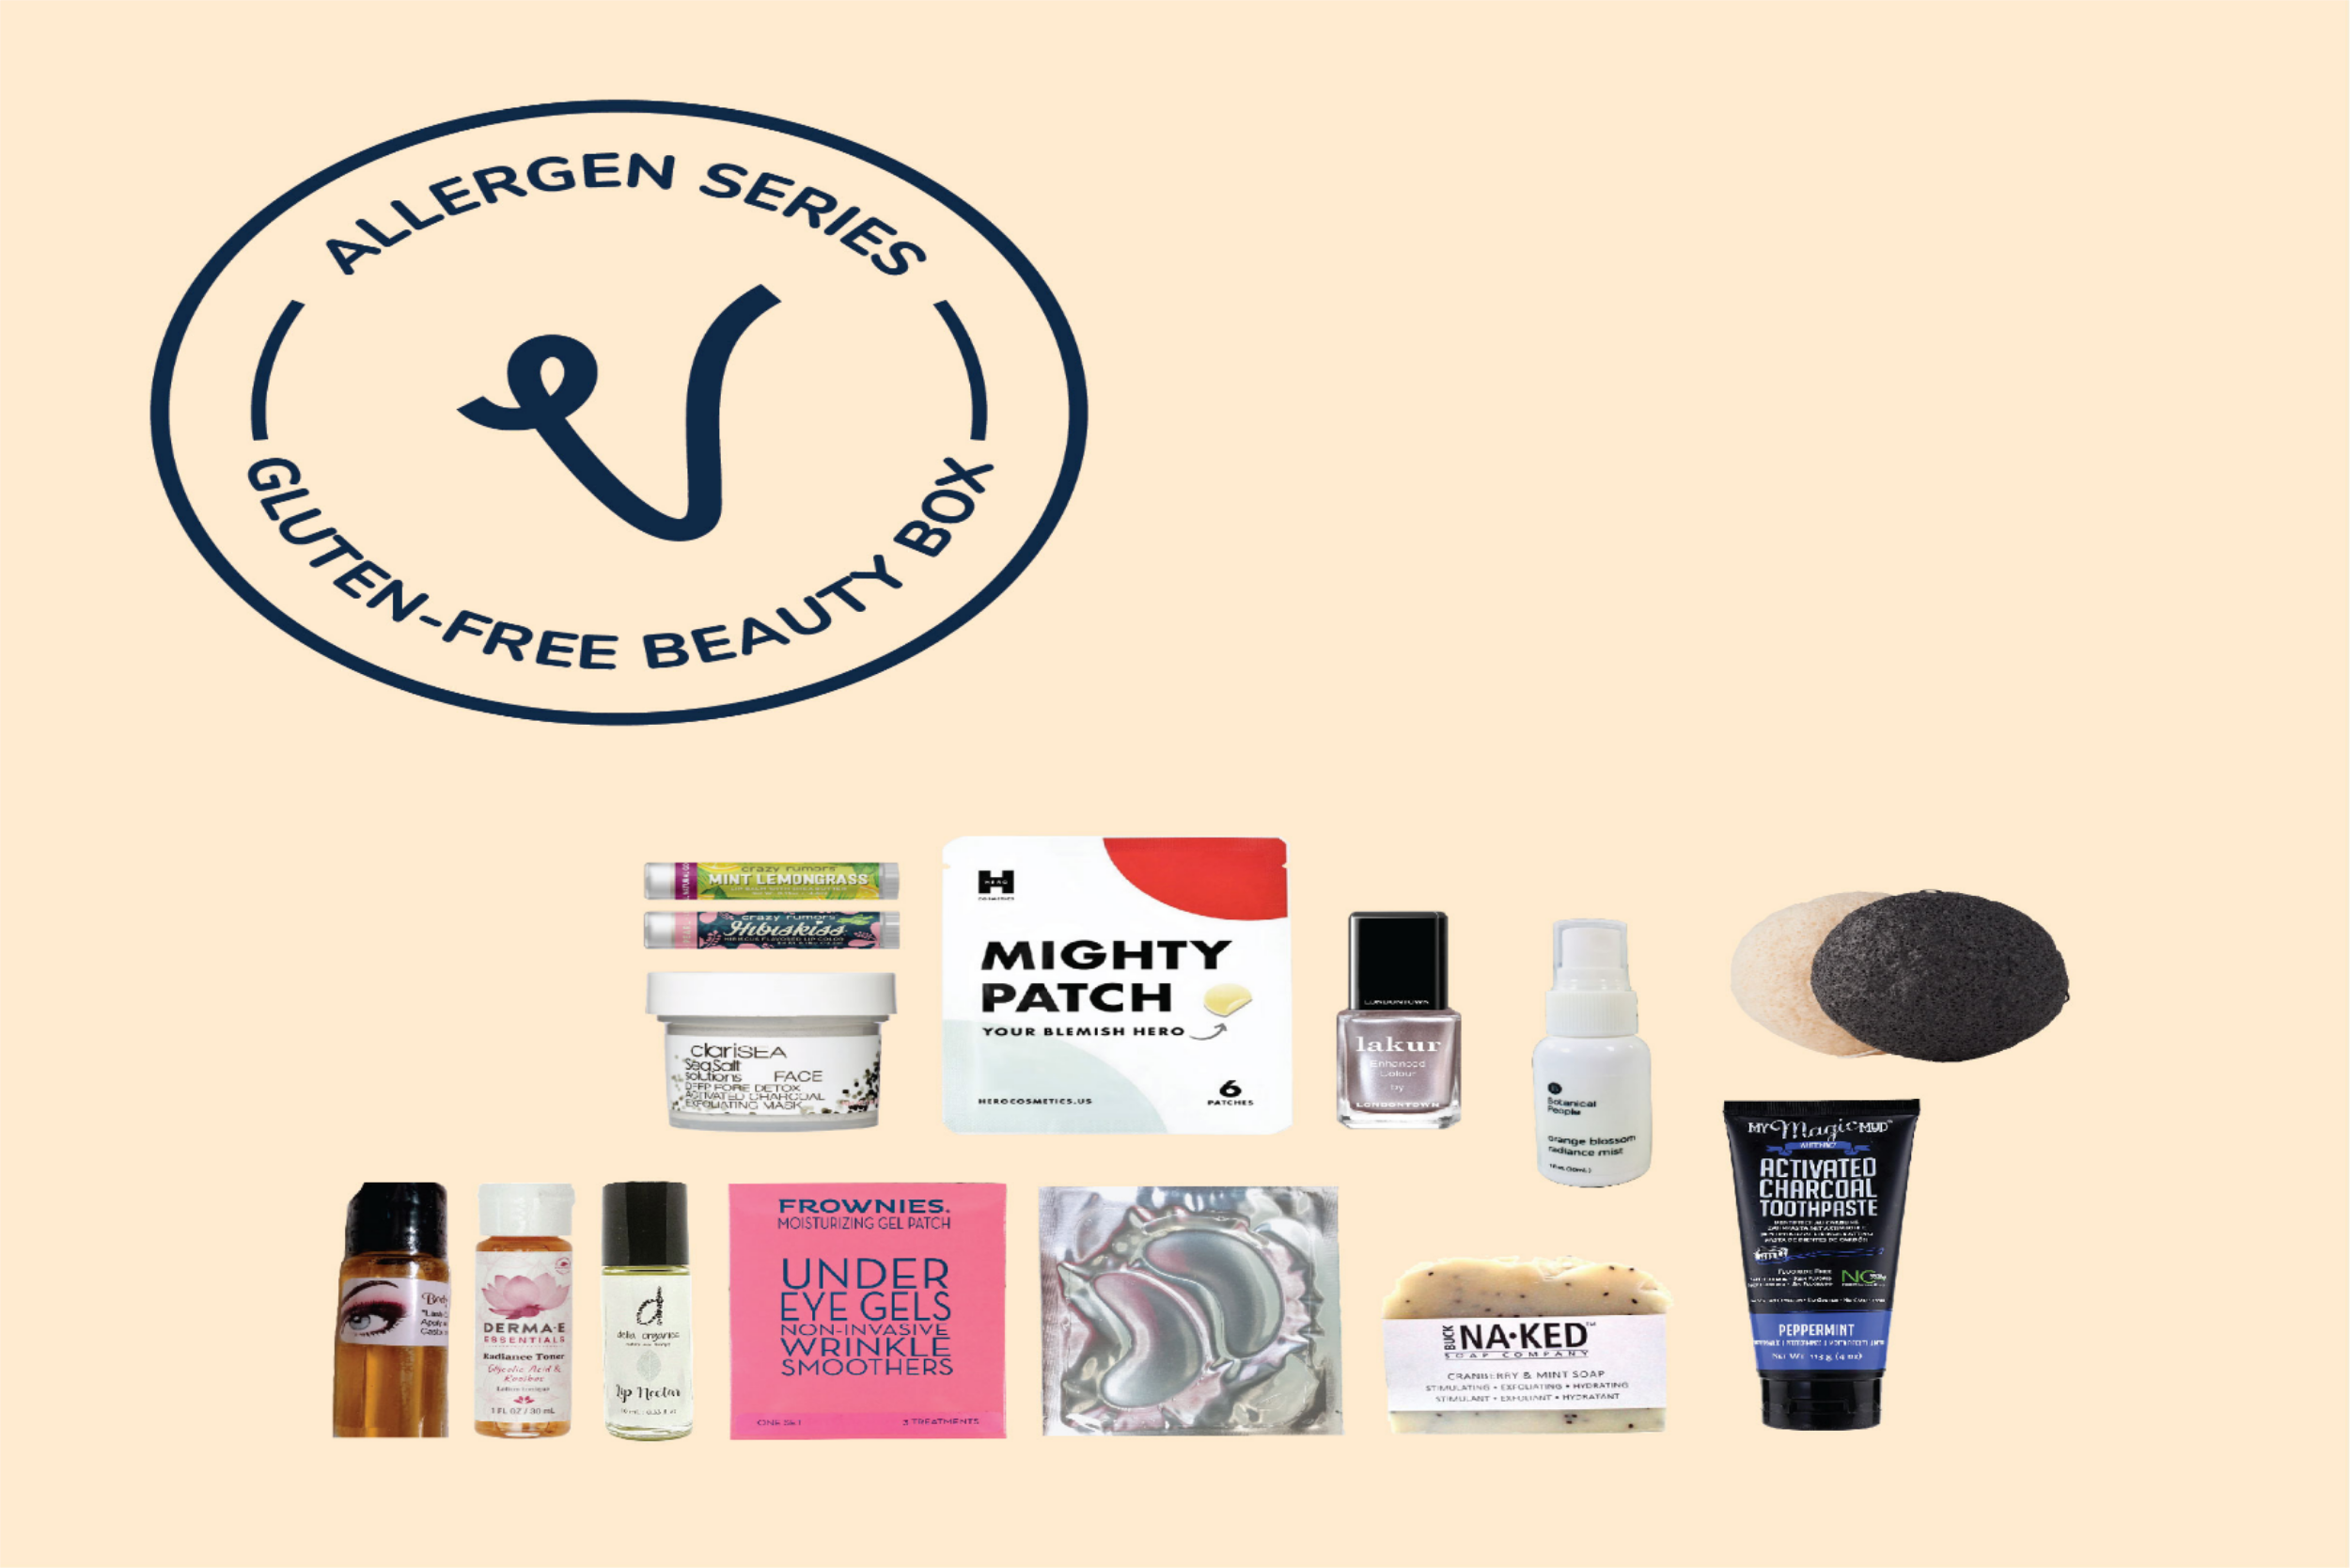 Day 3 of 12 Days of Sales: Gluten-Free Beauty Box